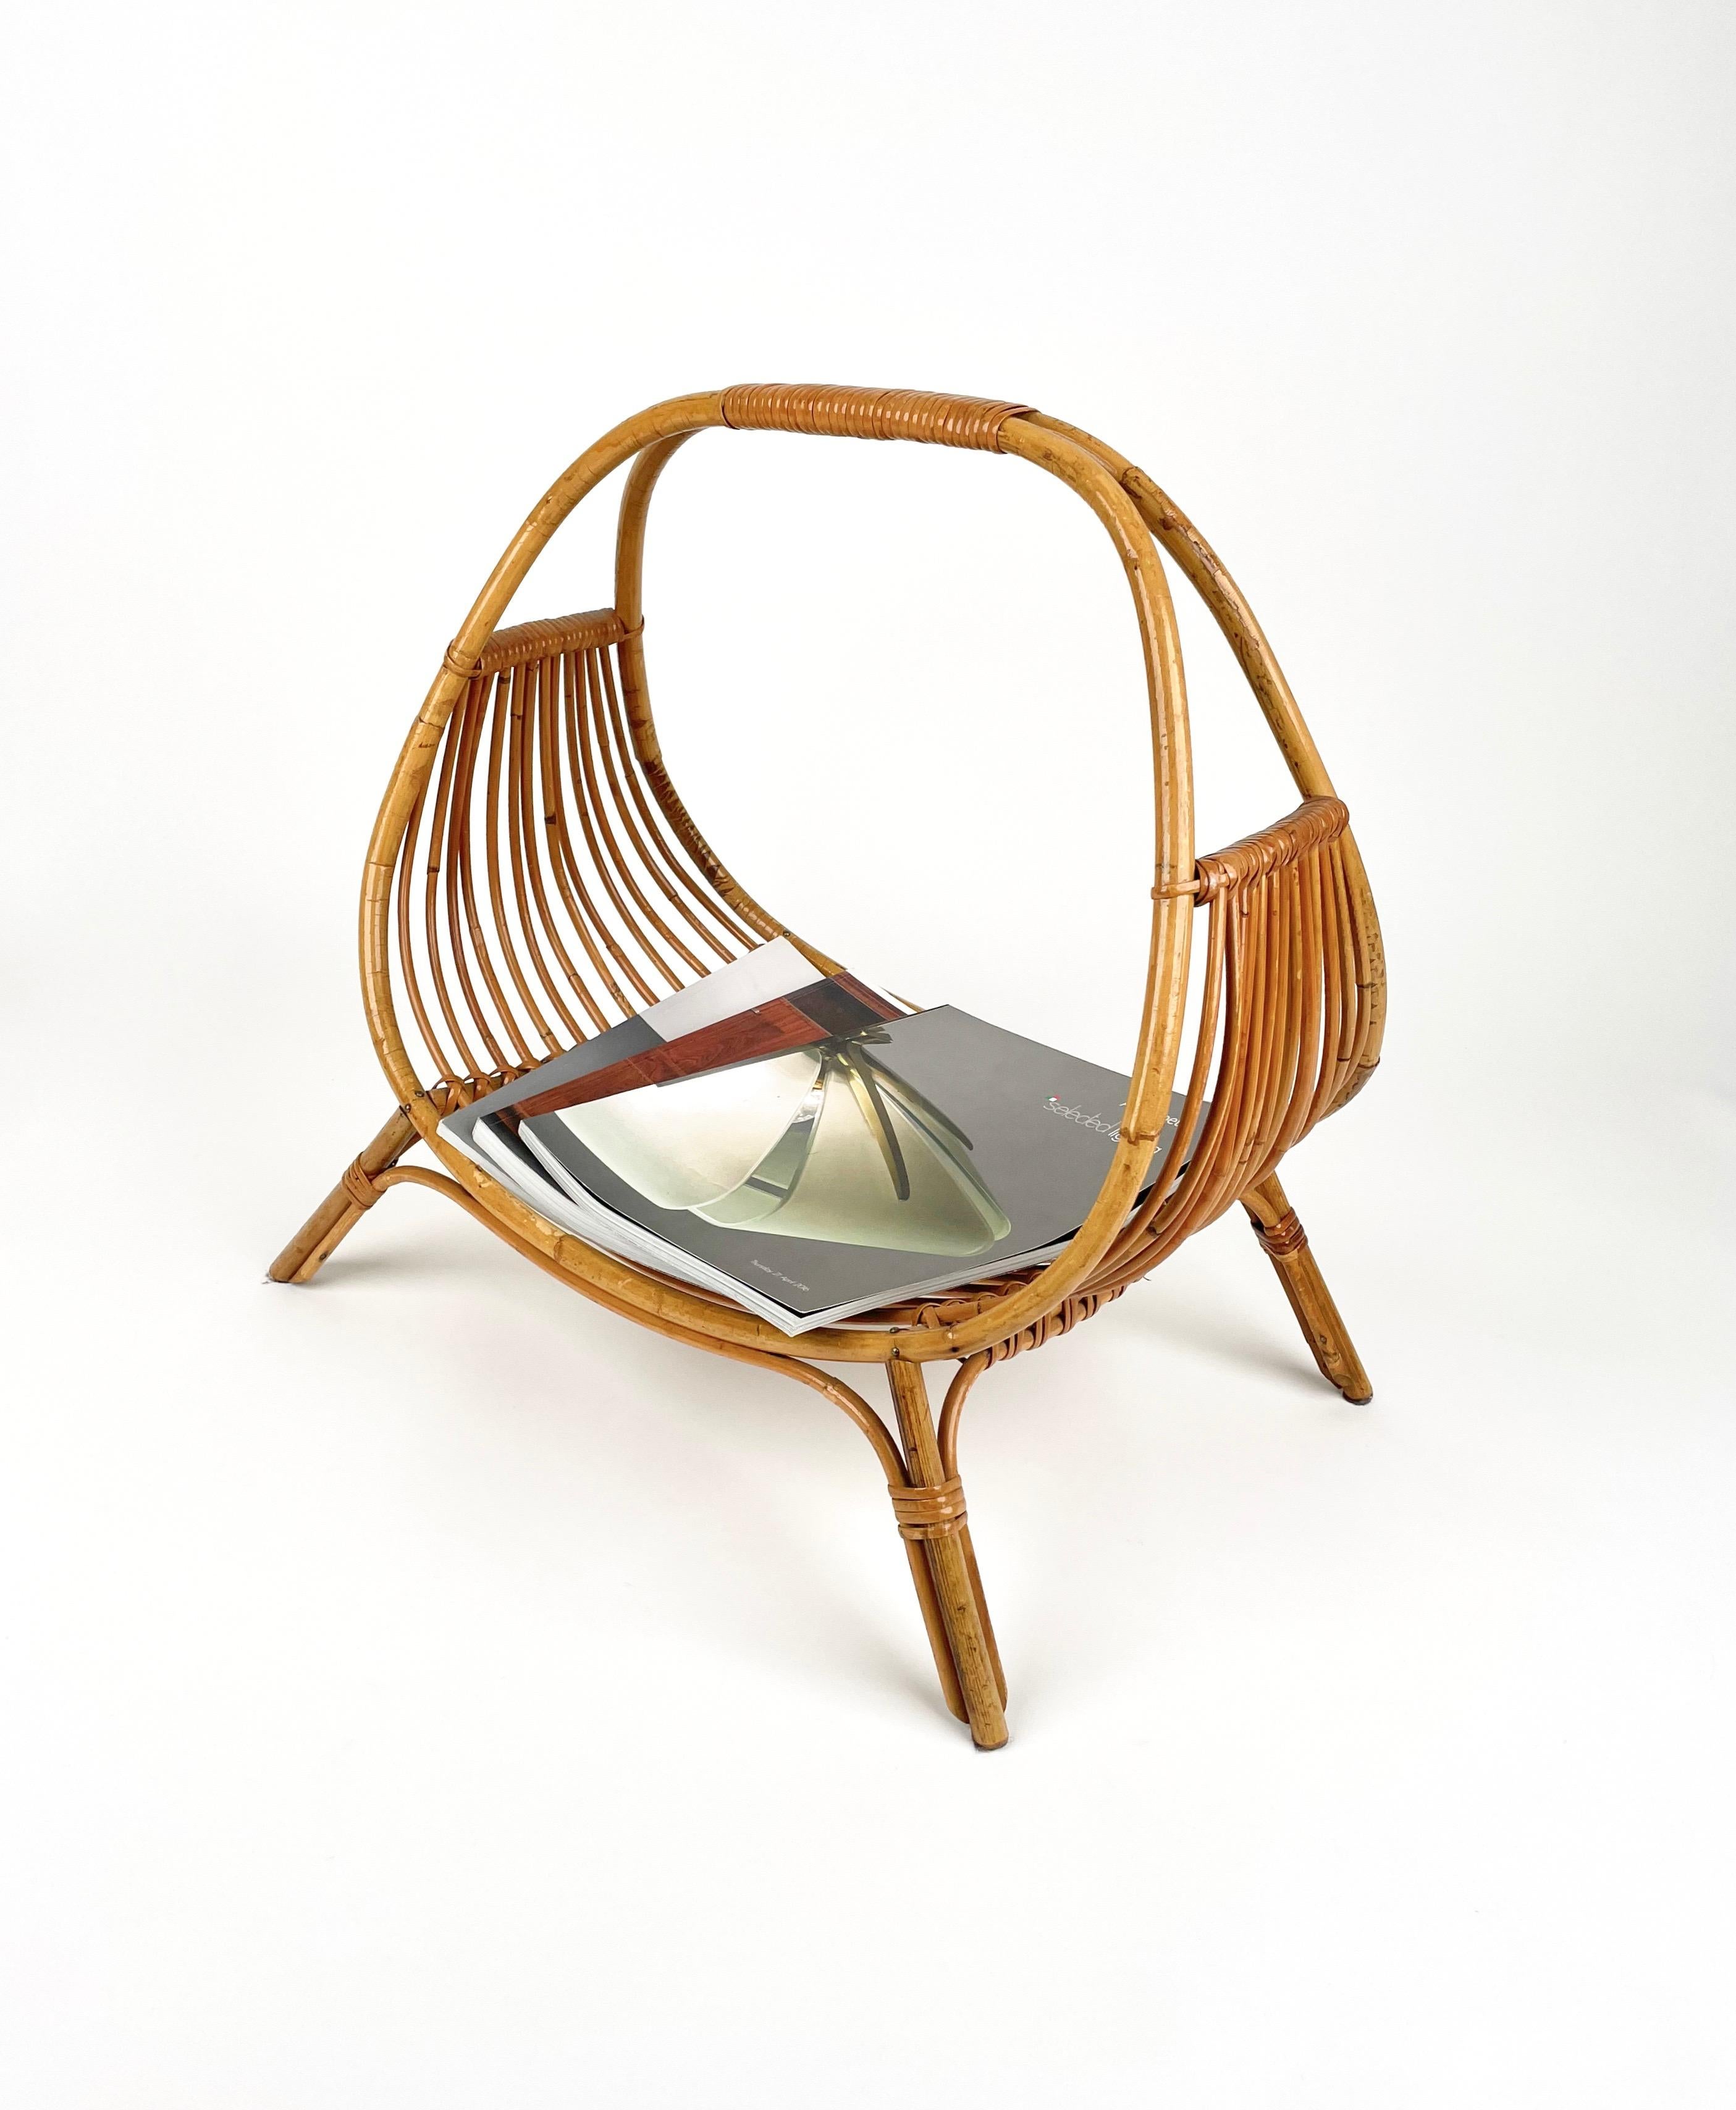 Midcentury Rattan & Bamboo Curved Magazine Rack, Italy 1960s For Sale 2